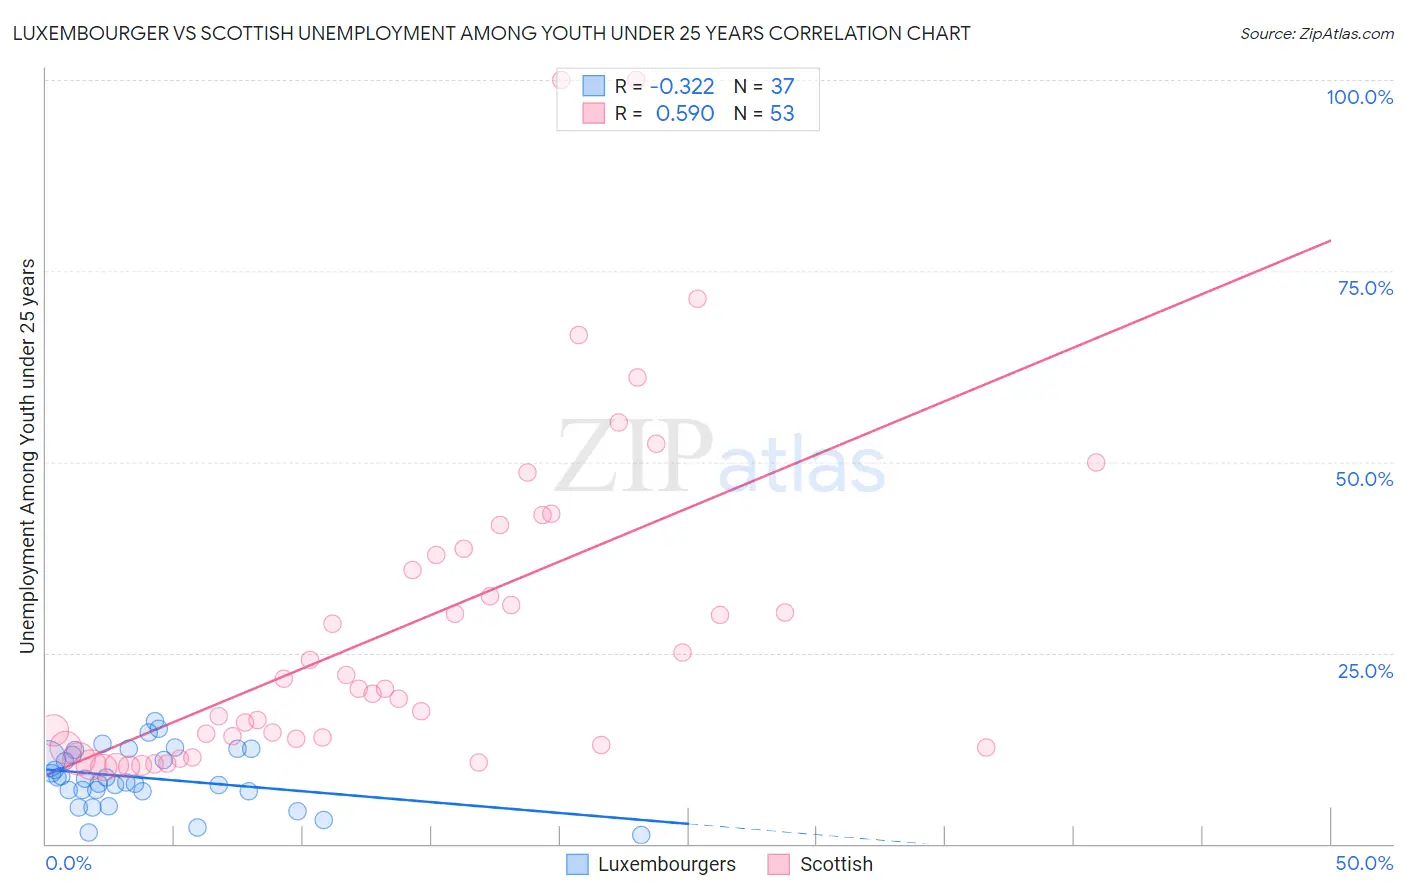 Luxembourger vs Scottish Unemployment Among Youth under 25 years